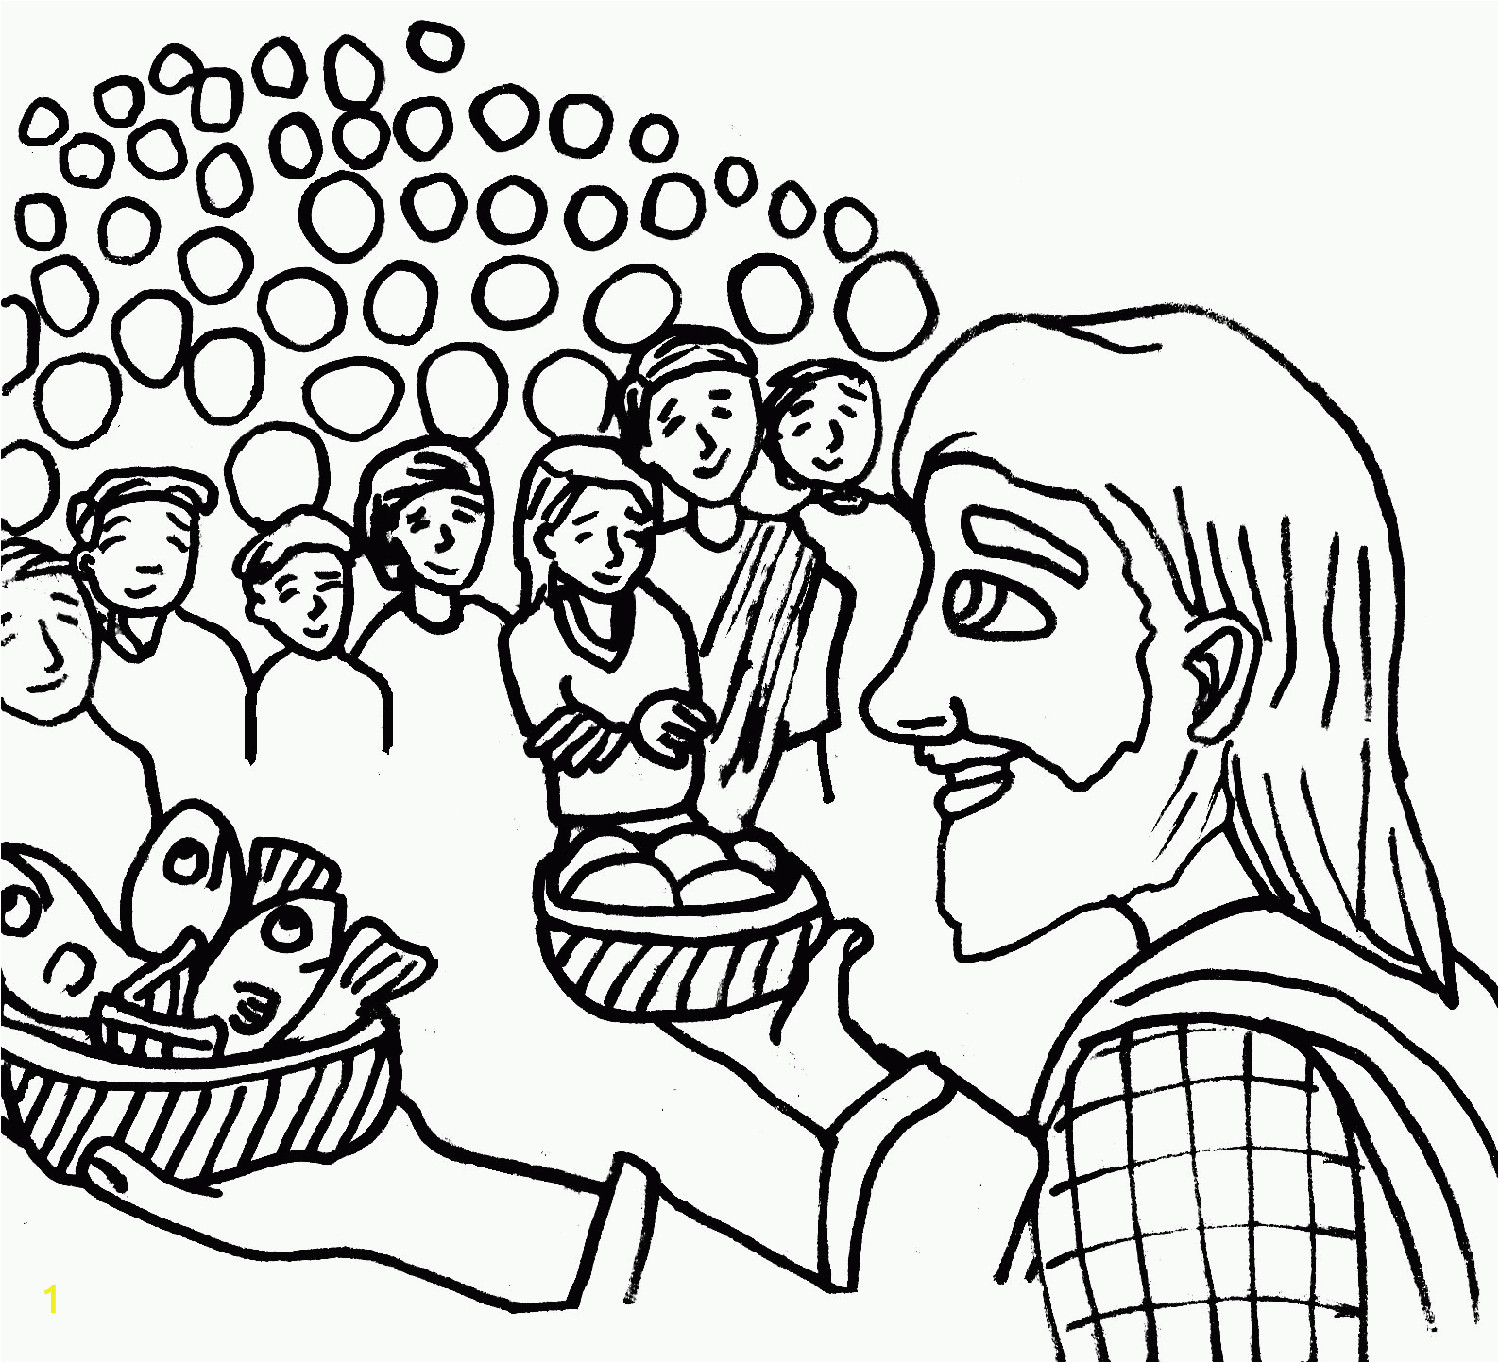 Printable Coloring Pages Of Jesus Feeding the 5000 Jesus Feeds the Five Thousand Coloring Page Coloring Home